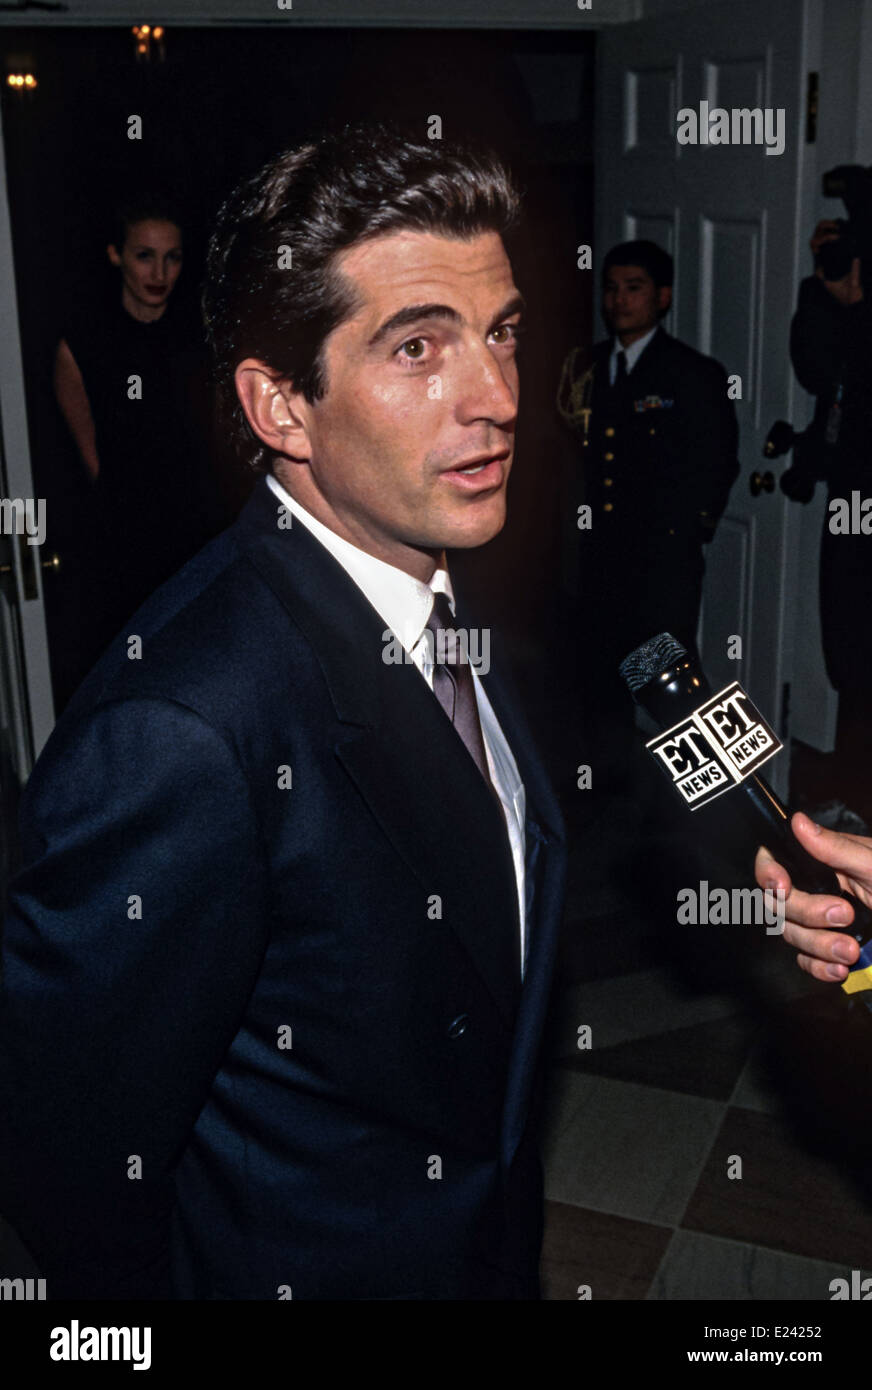 John Kennedy, Jr arrives for the State Dinner for British Prime Minister Tony Blair at the White House February 5, 1998 in Washington, DC. Stock Photo